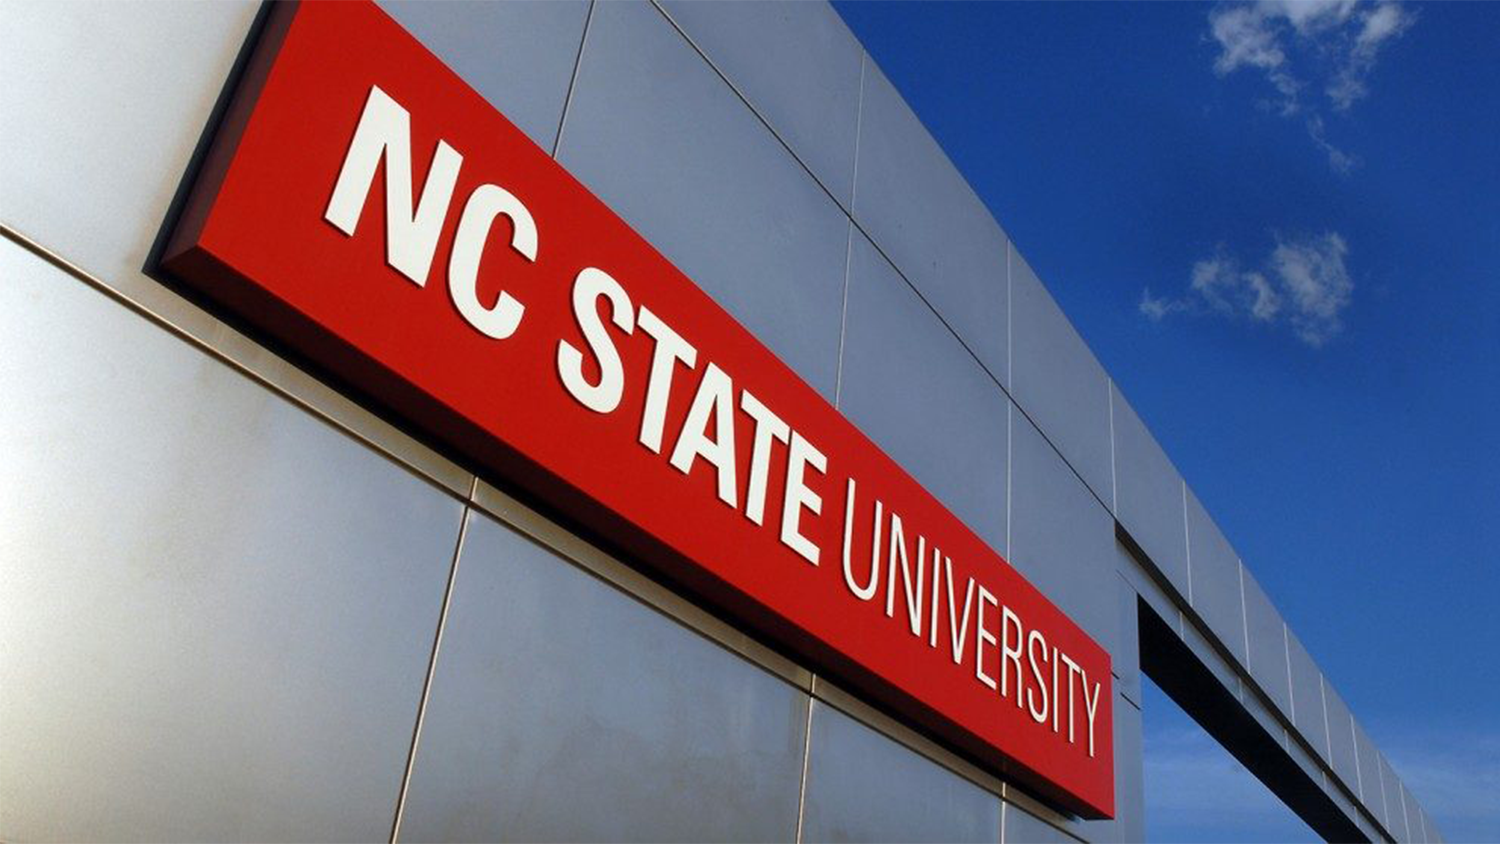 NC State sign